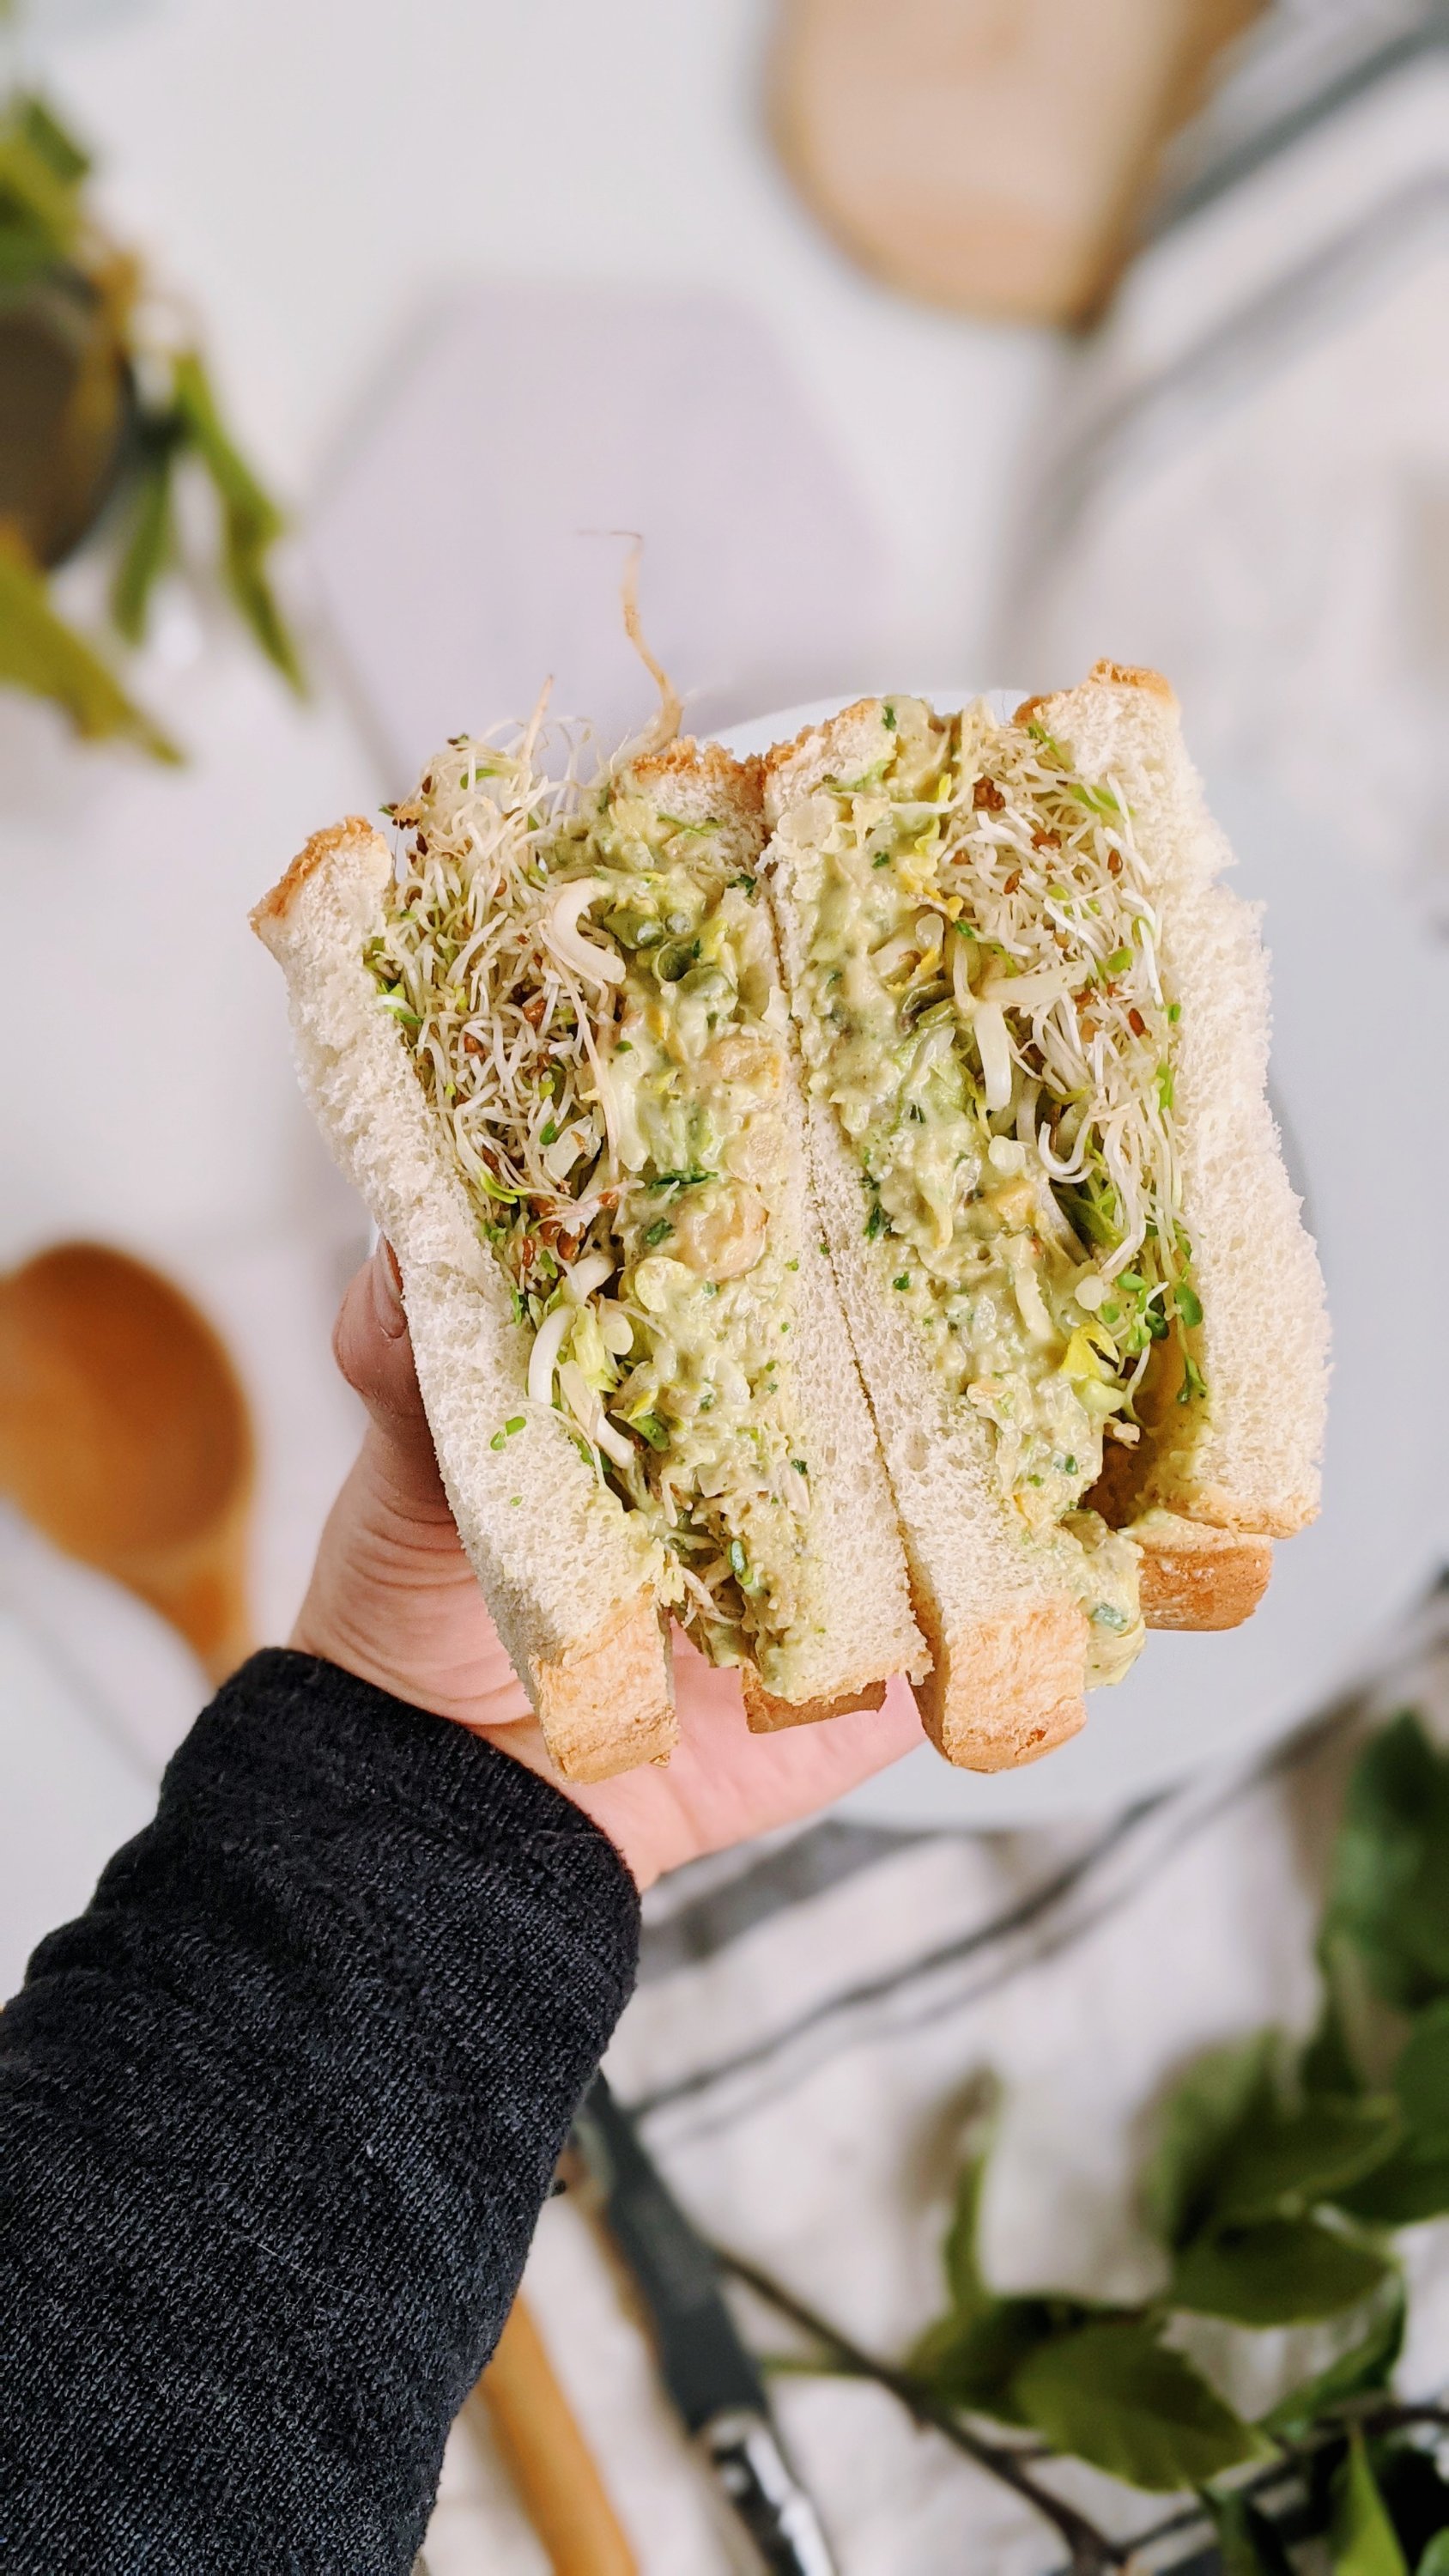 pesto with chickpeas plant based gluten free pesto salad sandwiches no cook lunch recipes vegetarian gluten free healthy homemade lunches no heat